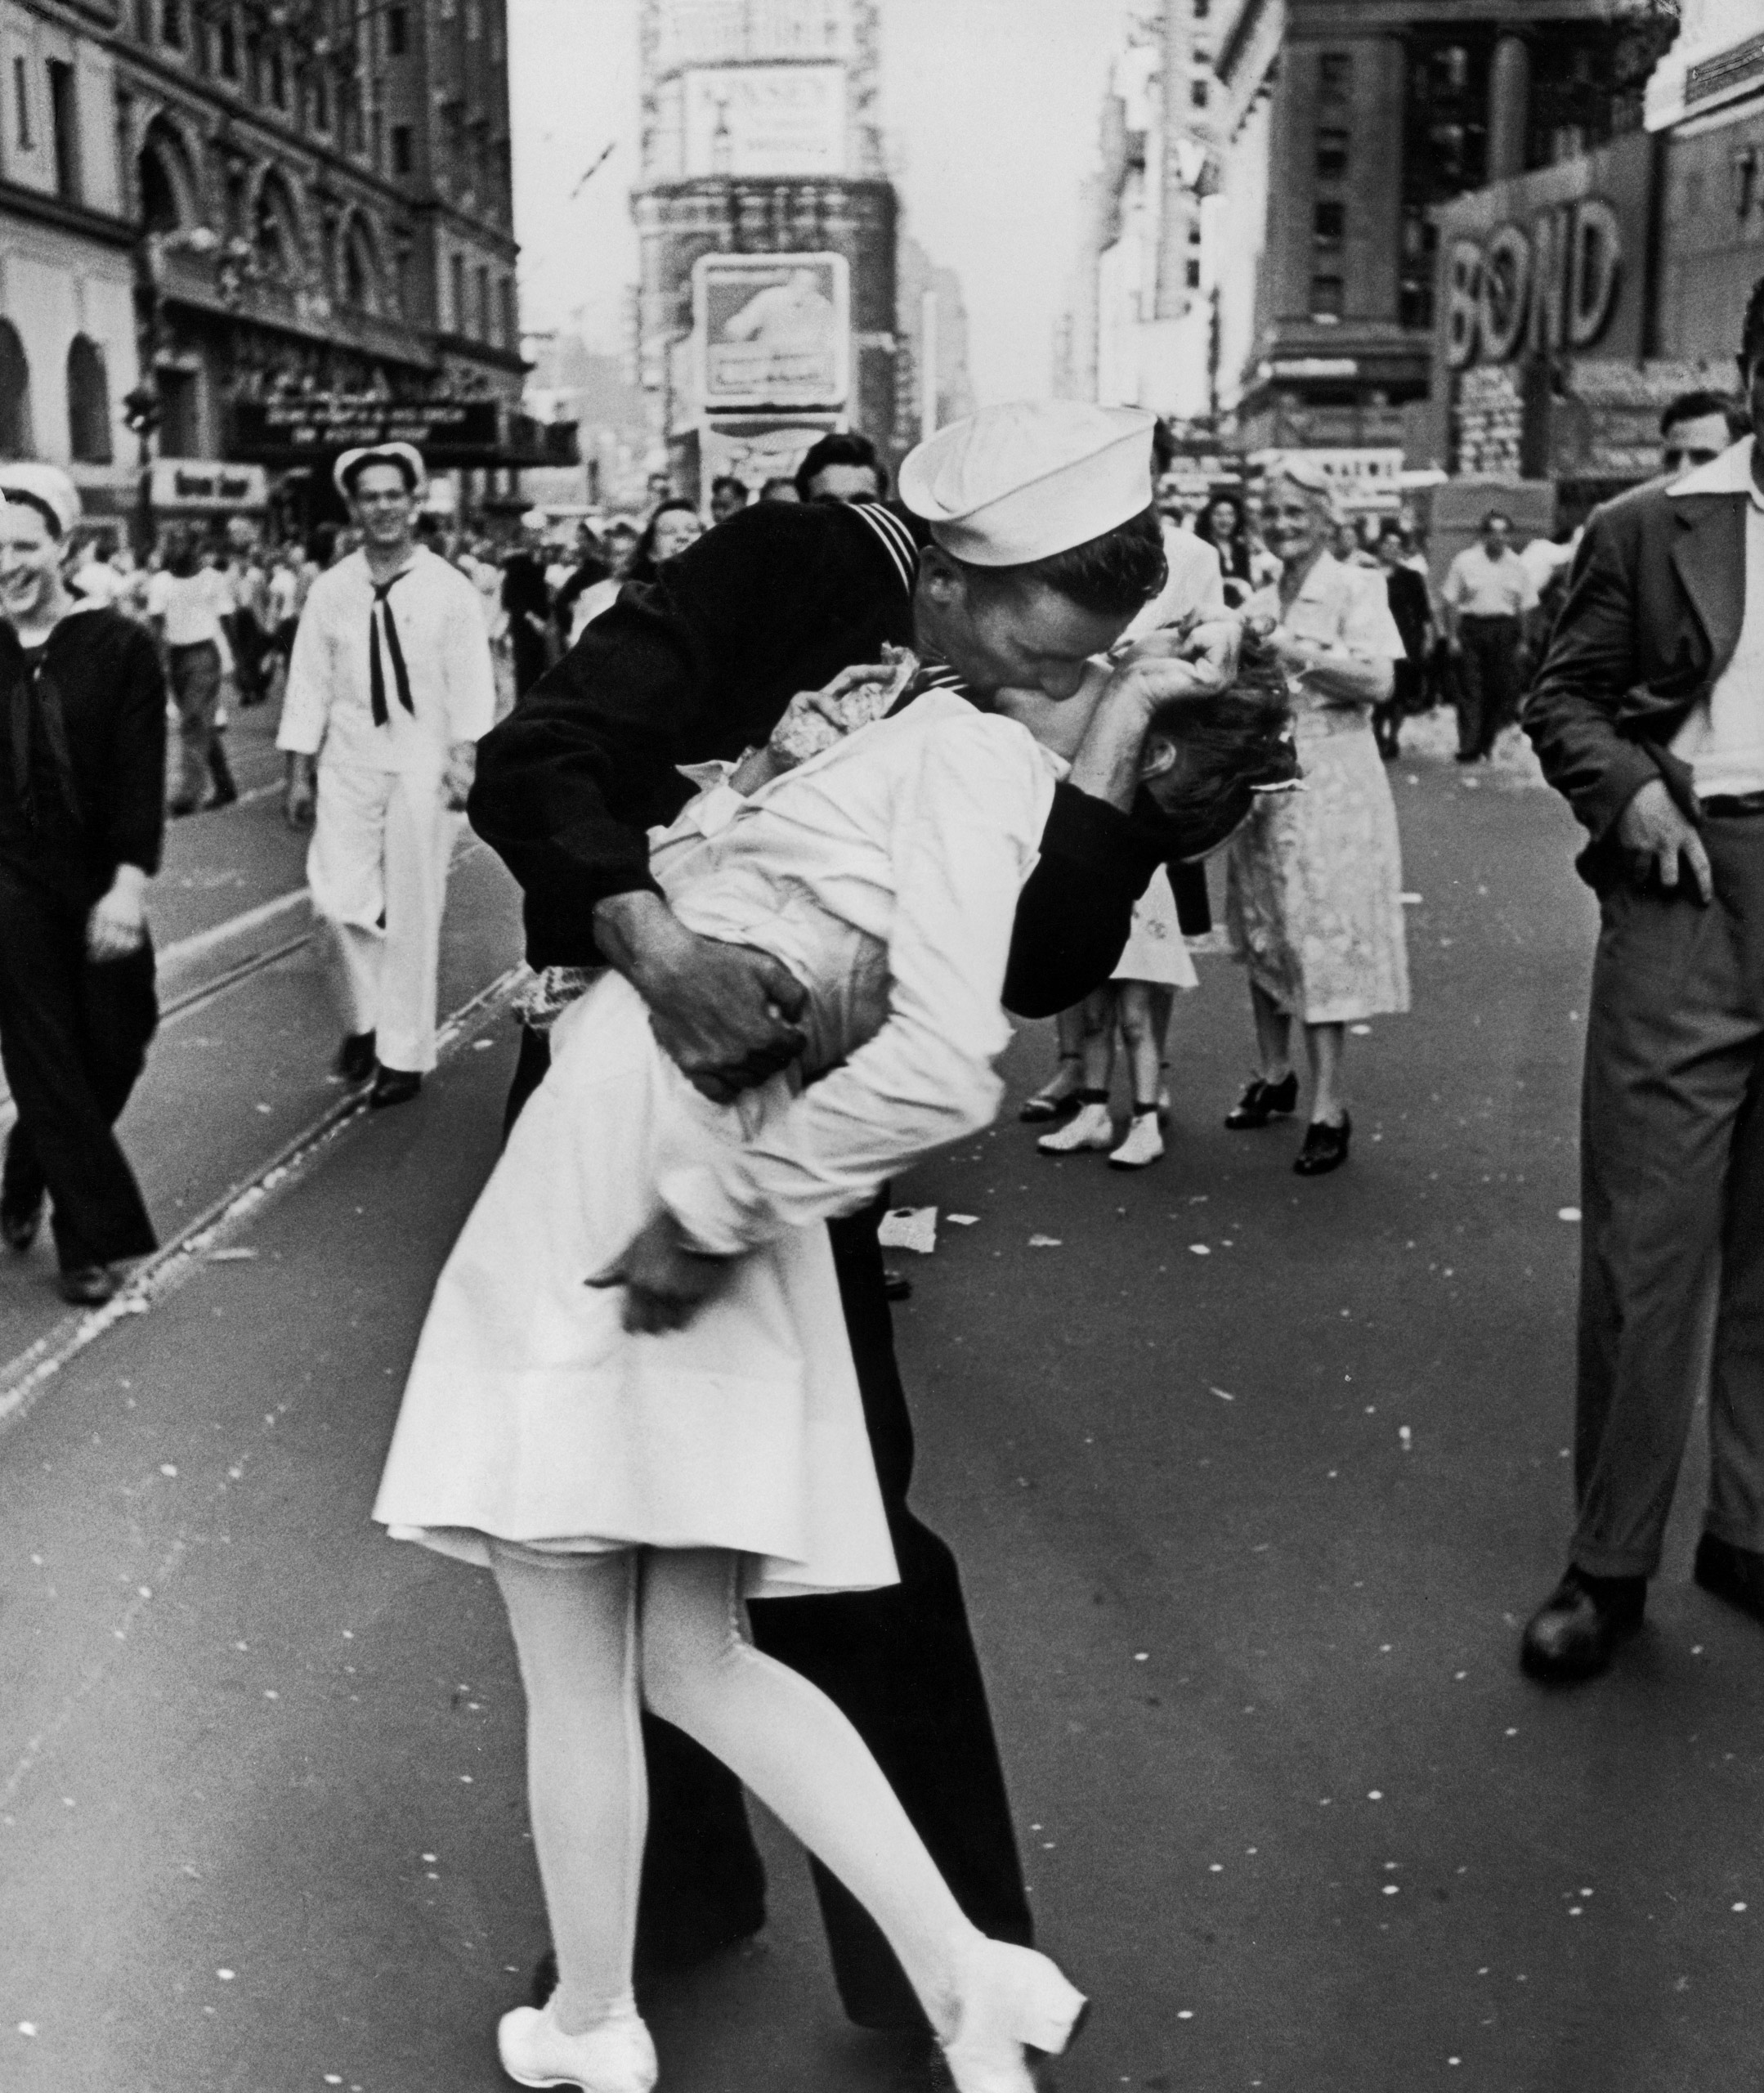 VJ Day Kiss in Times Square Go Behind the Lens of That Famous Photo